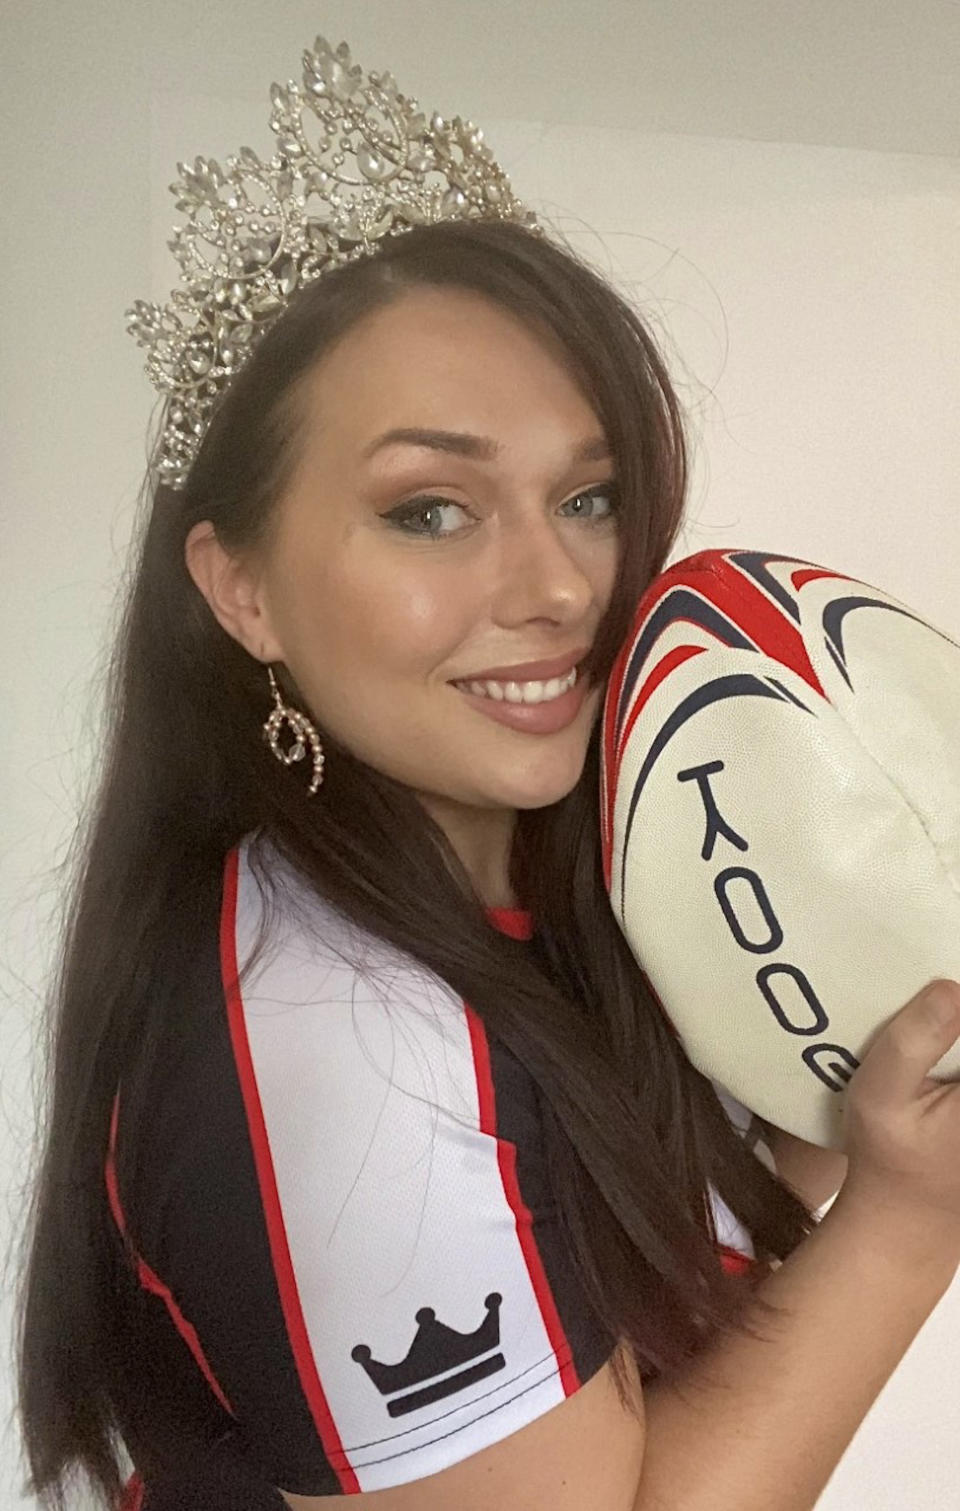 Rugby-playing beauty queen poses in rugby outfit with tiara